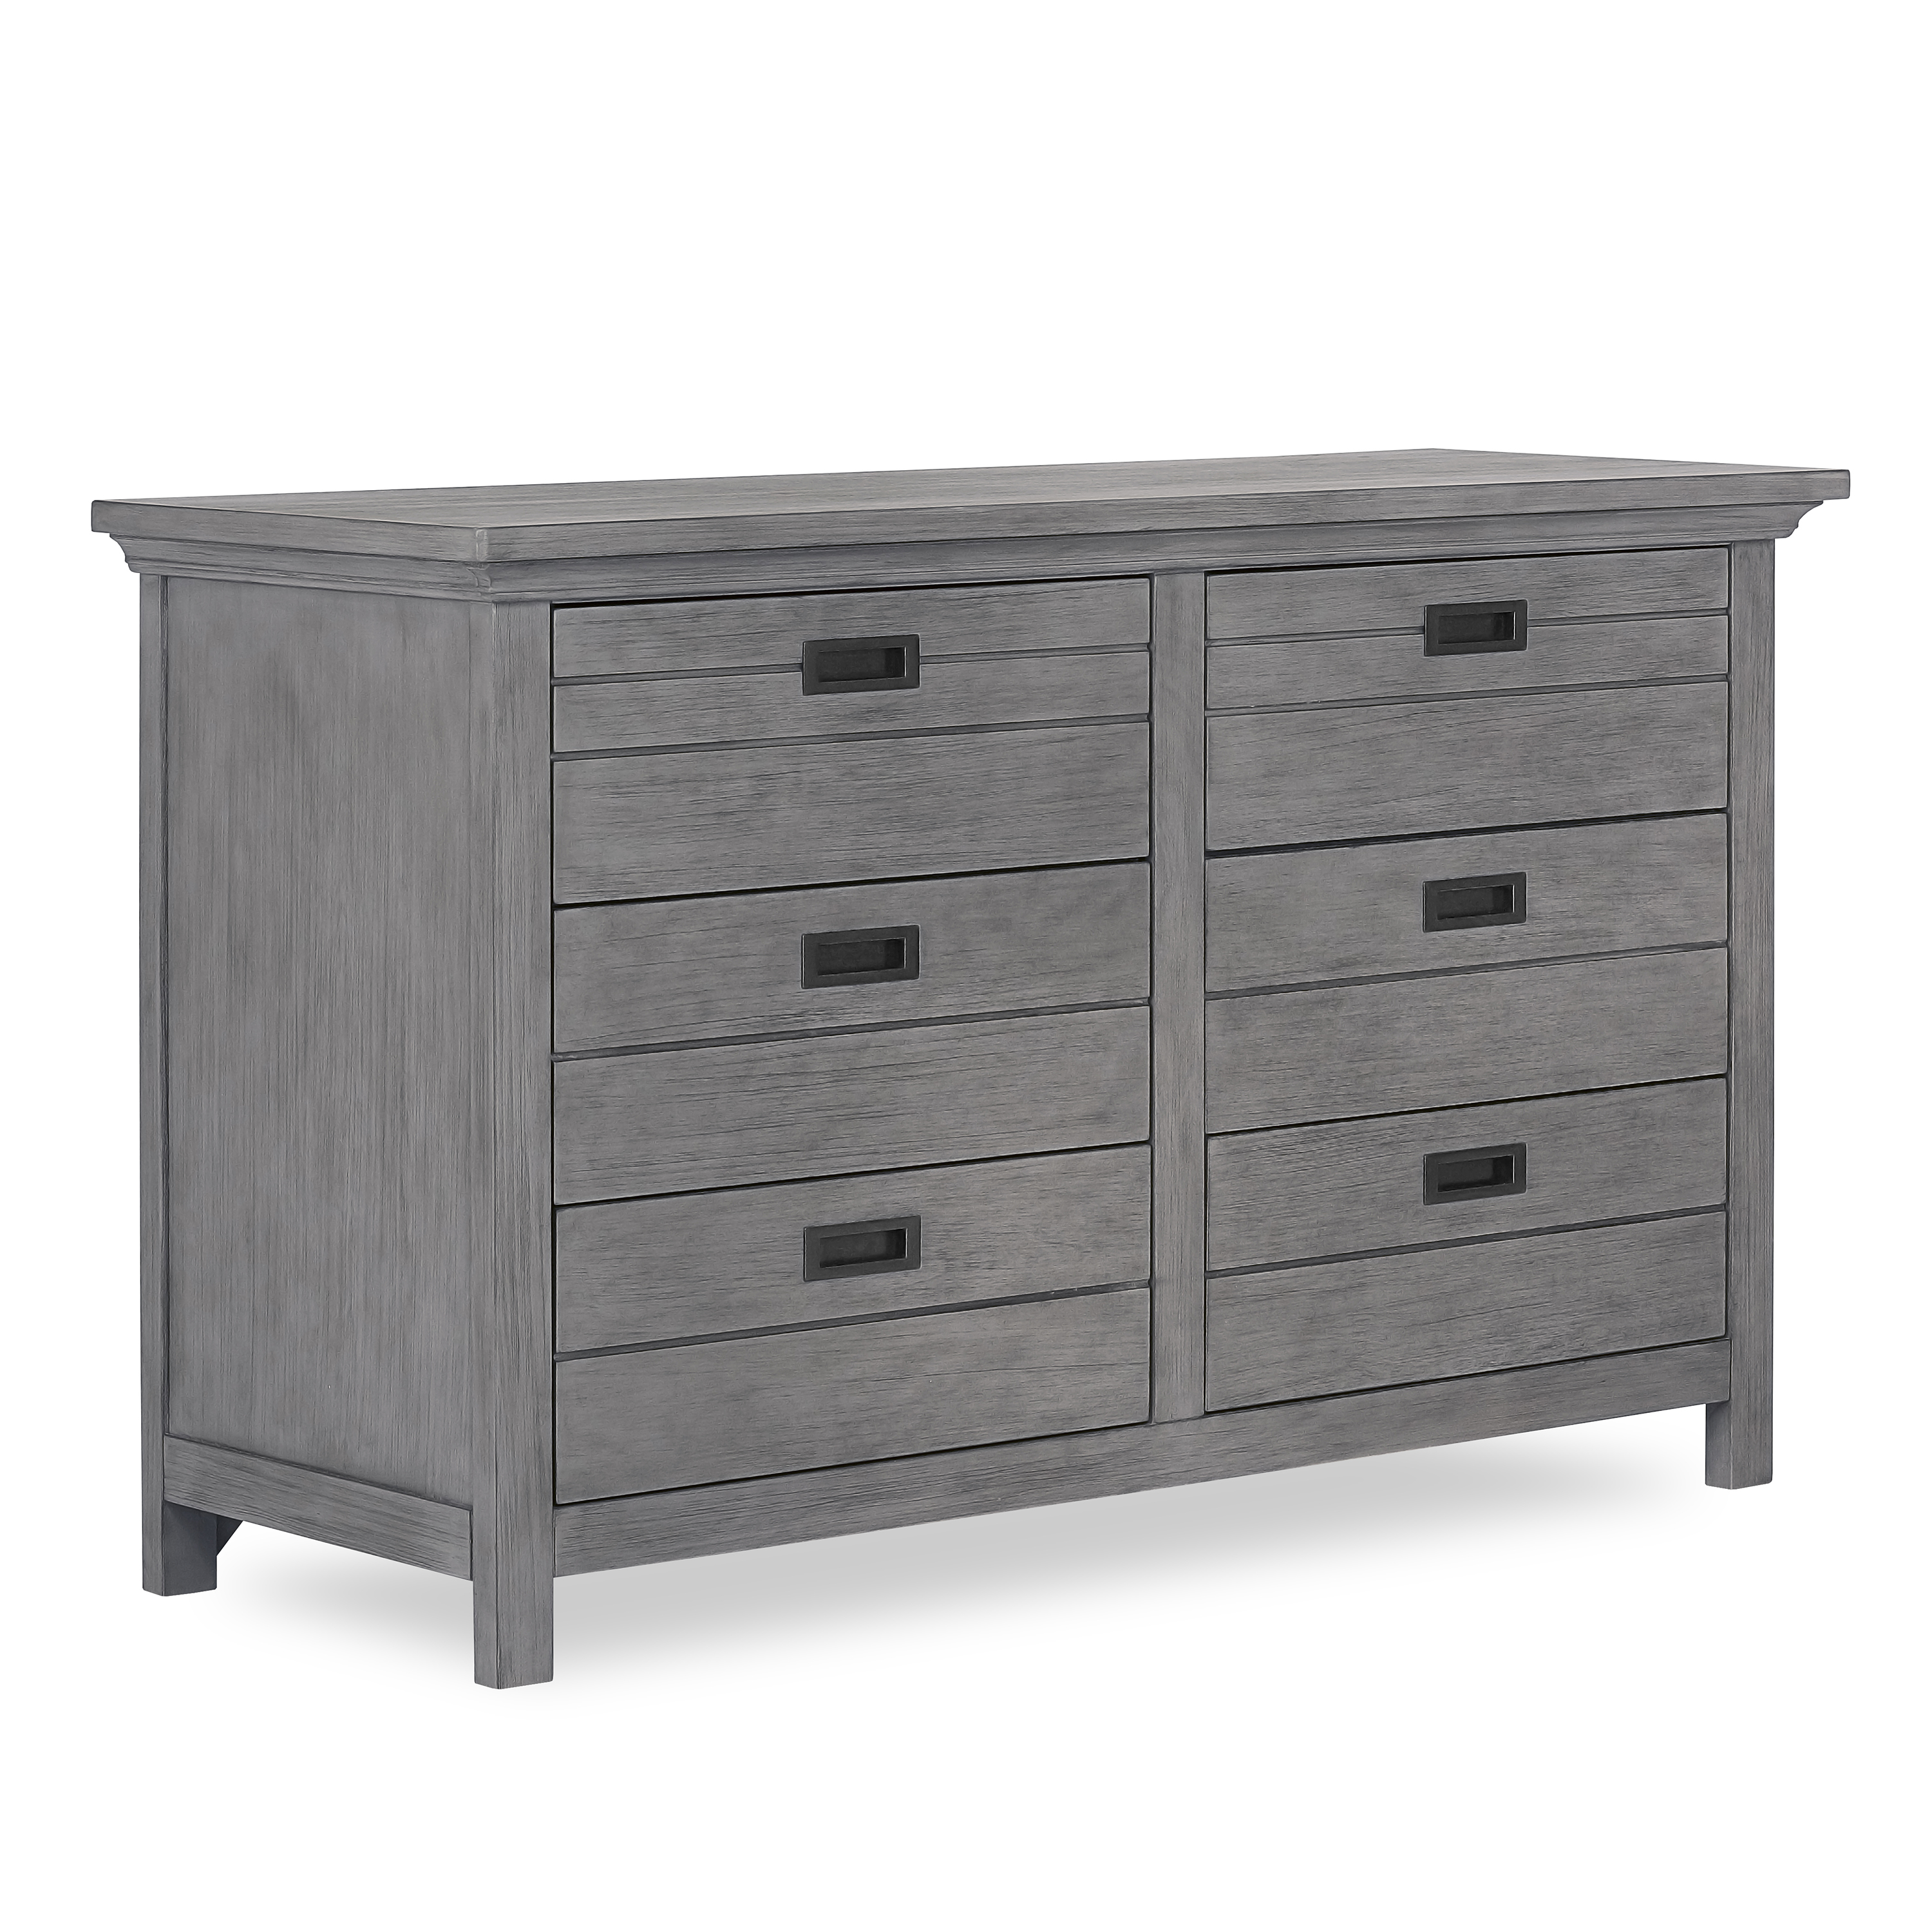 Evolur Waverly 6 Drawer Double Dresser Rustic Gray - image 1 of 3